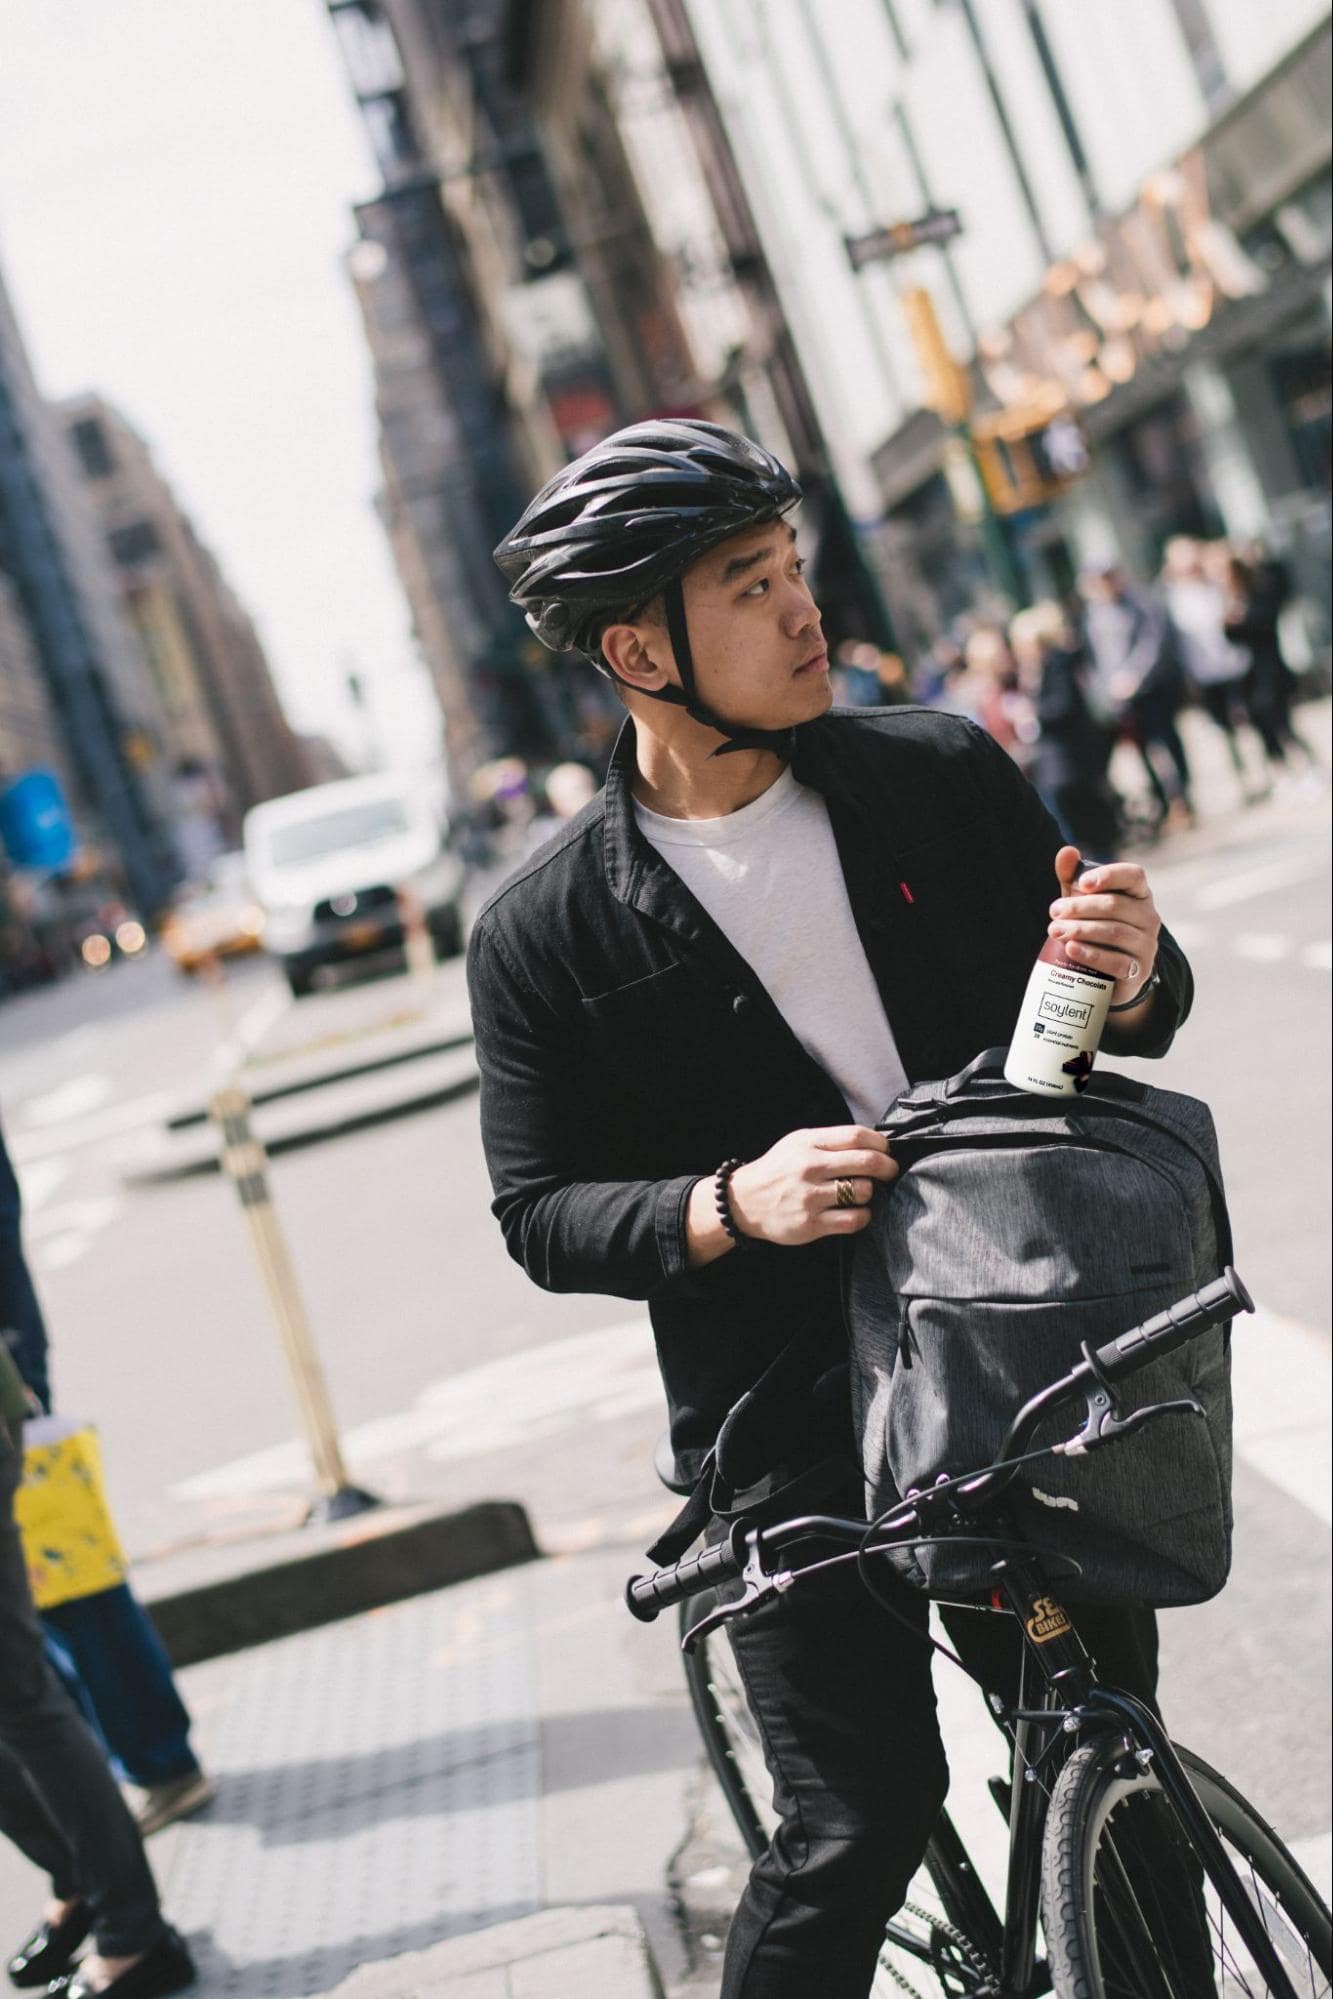 Image of a person on a bike holding a bottle of Soylent